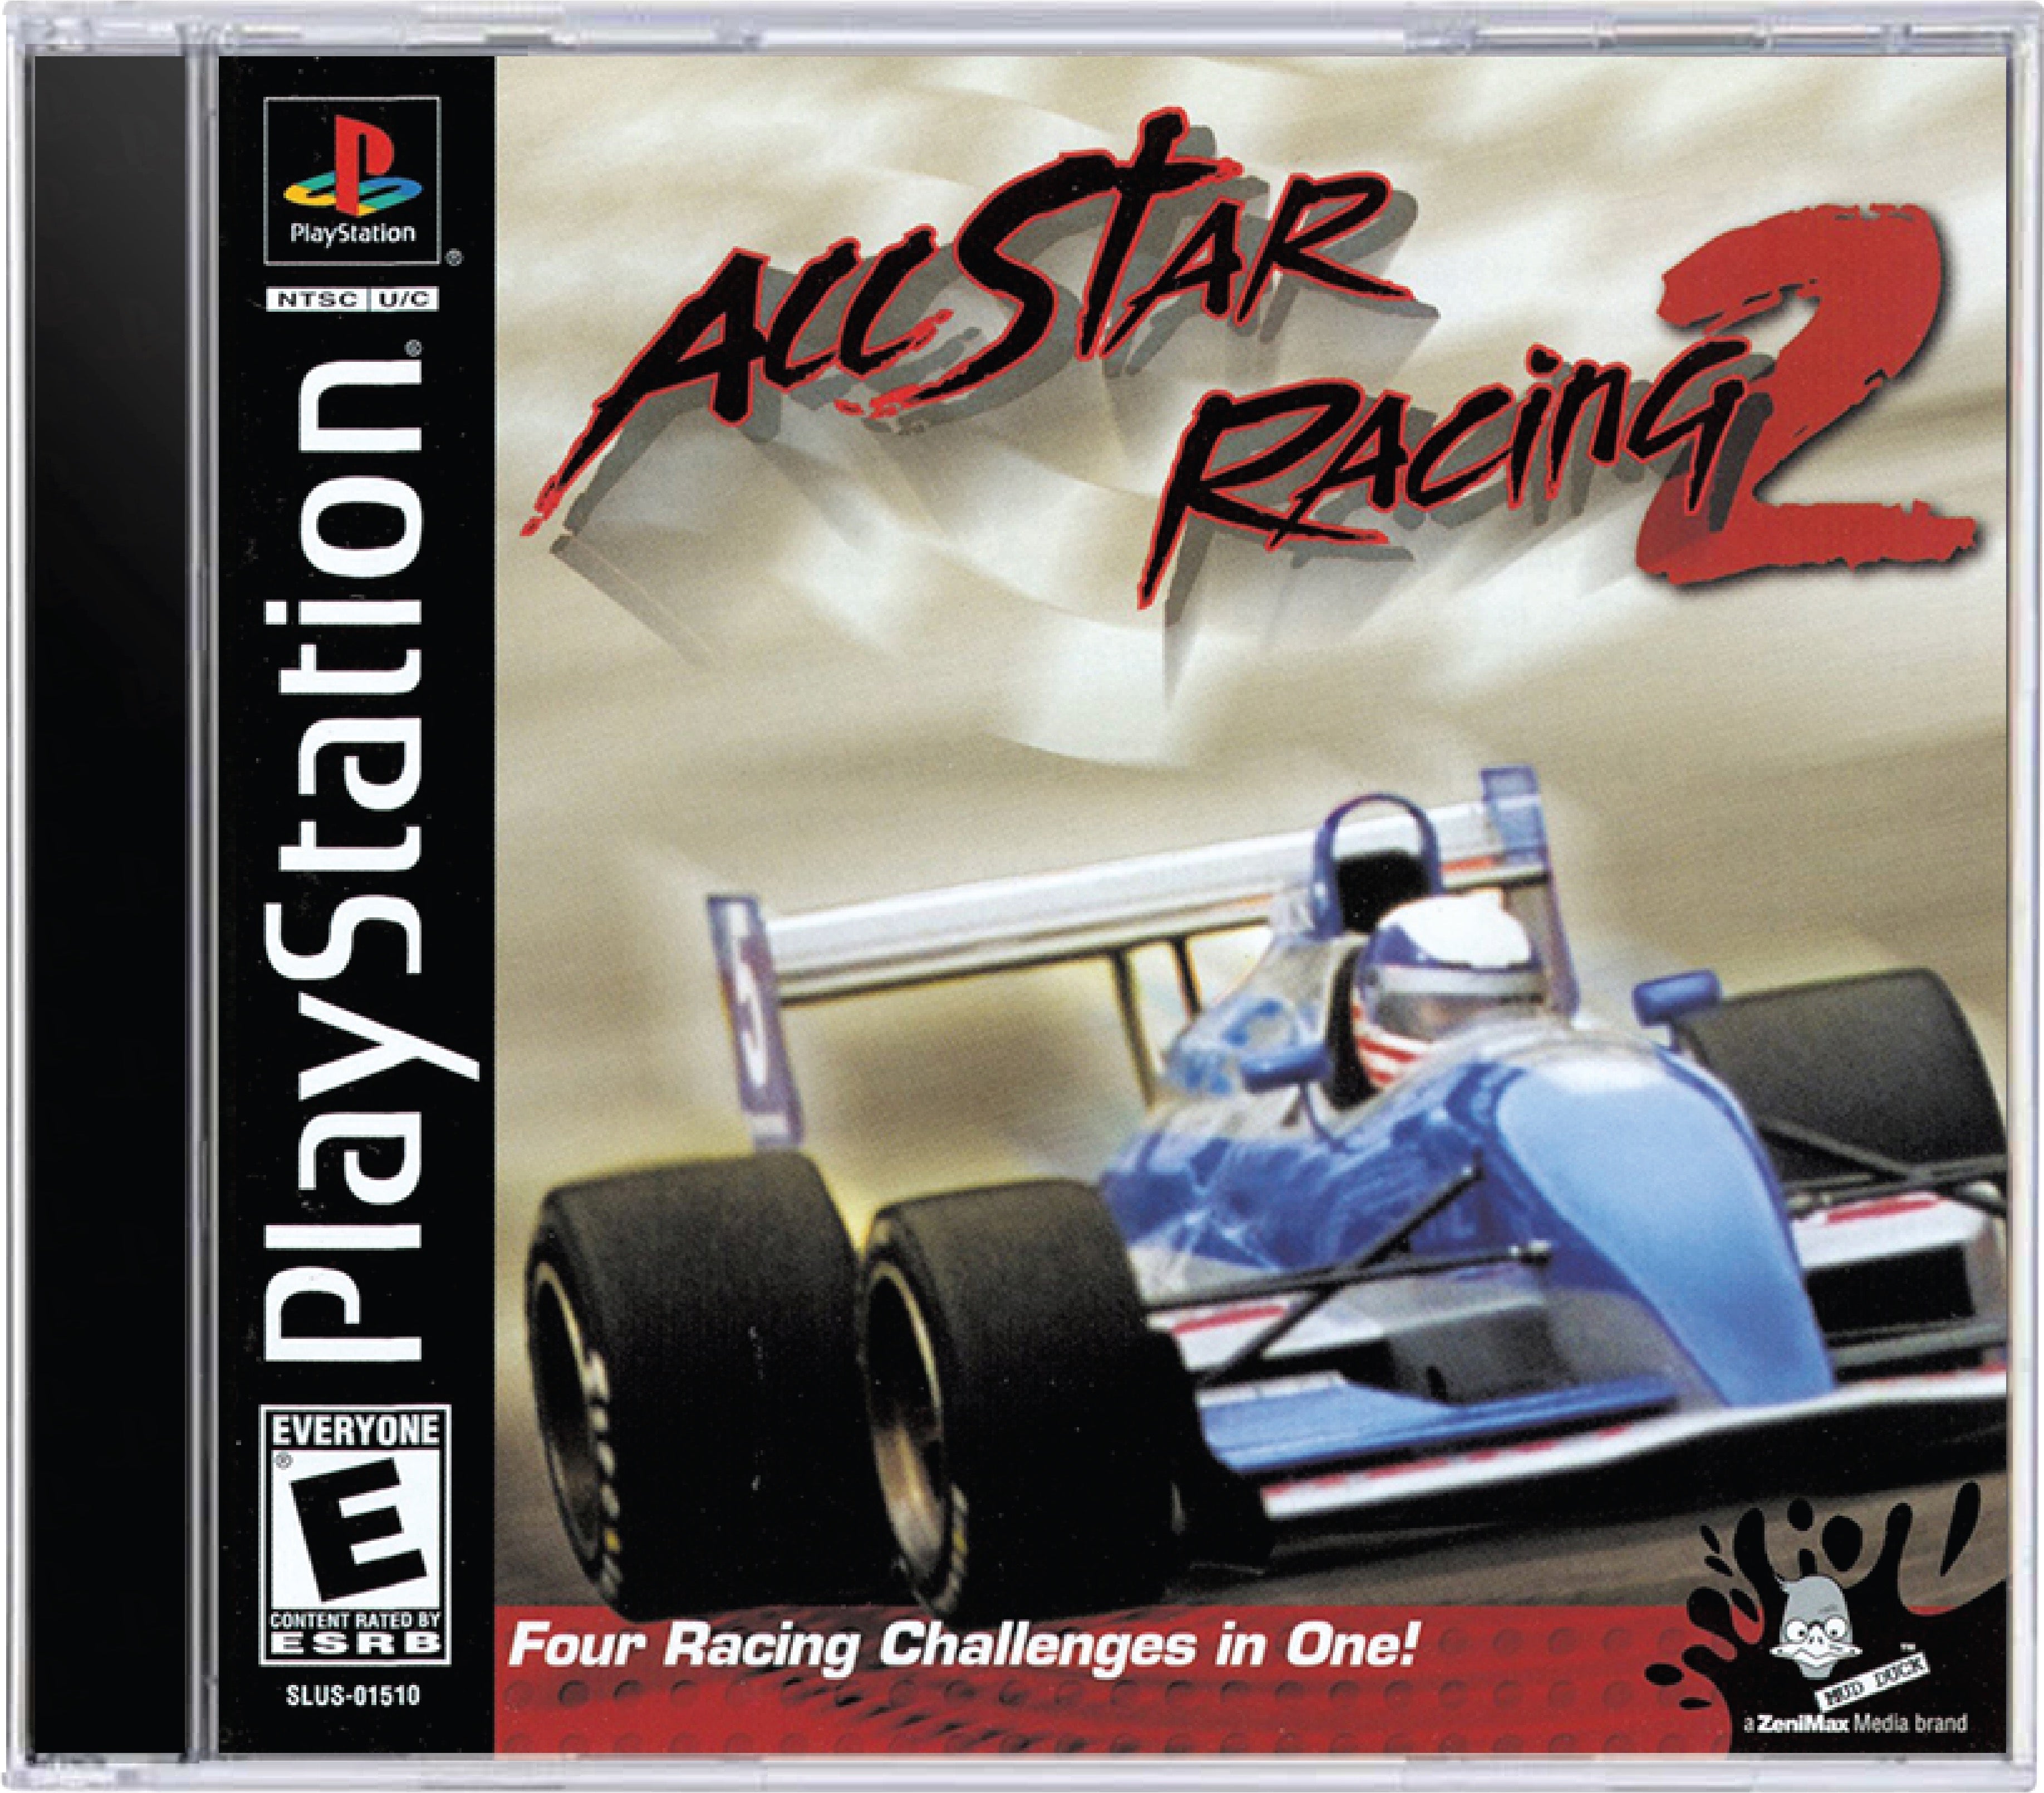 All-Star Racing 2 Cover Art and Product Photo